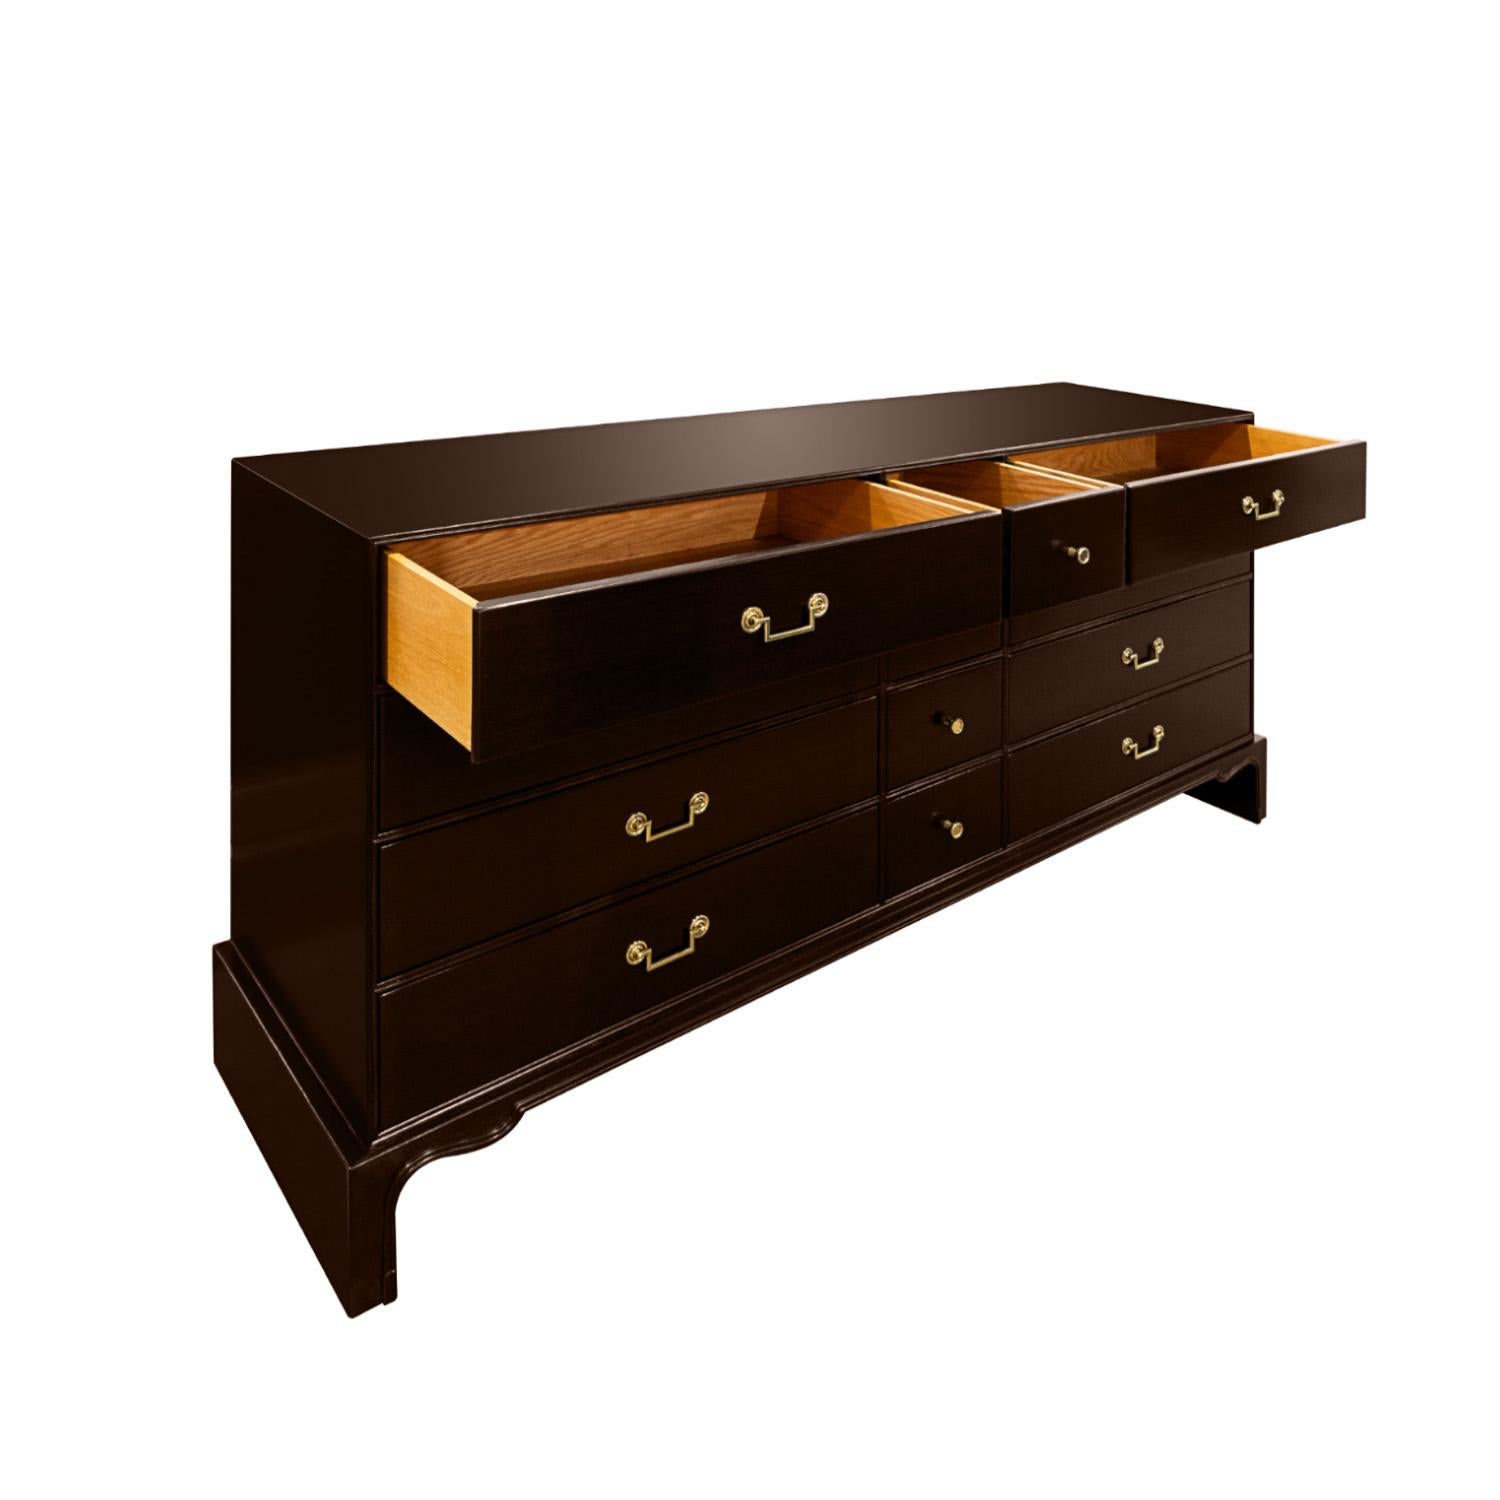 Hand-Crafted Tommi Parzinger Elegant Chest Of Drawers with Brass Pulls 1940s (Signed) For Sale